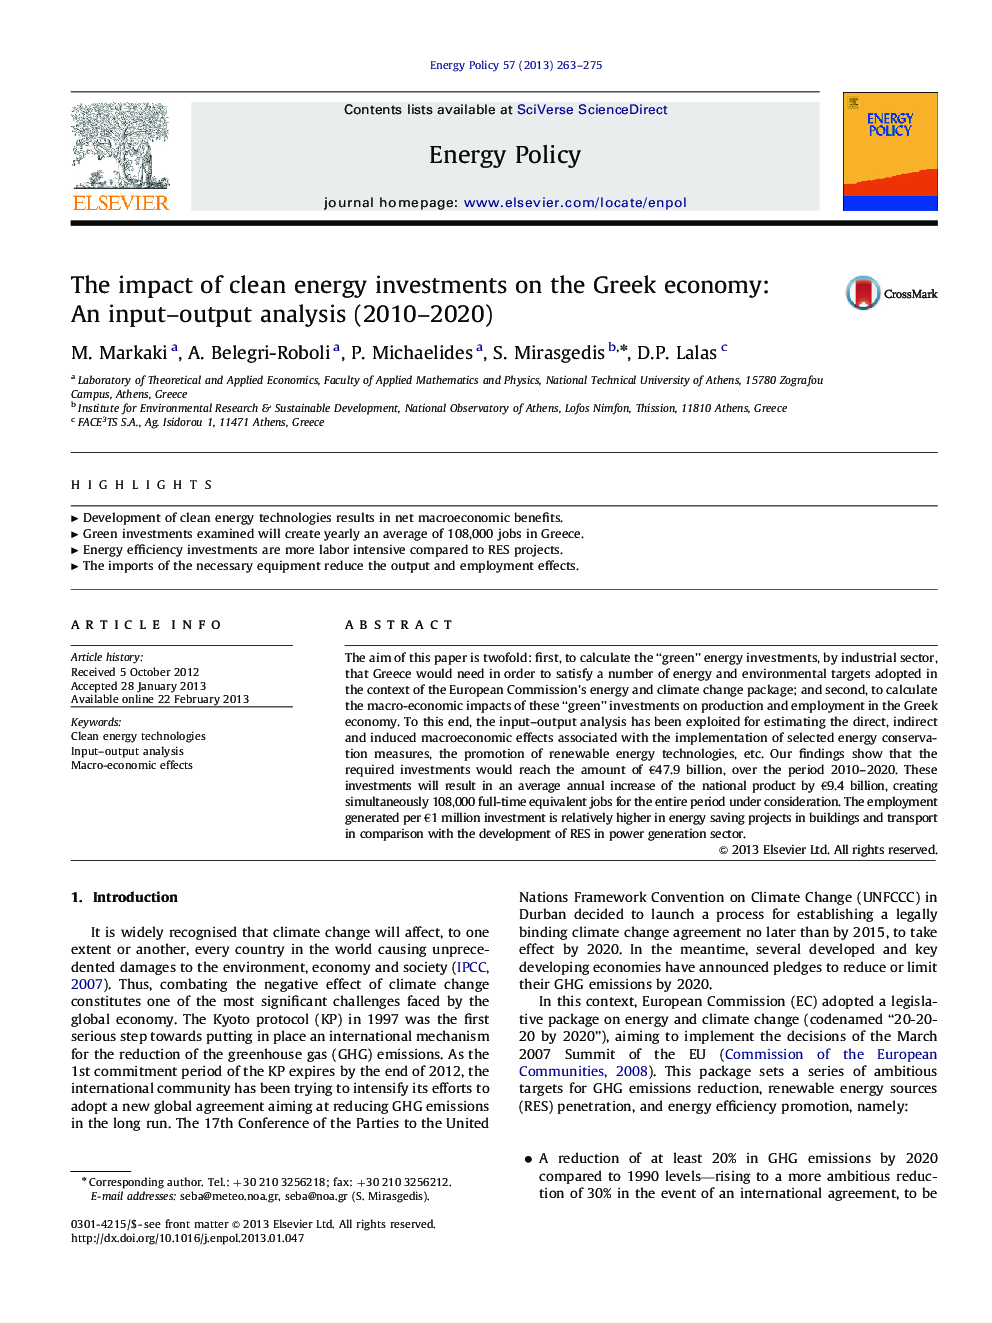 The impact of clean energy investments on the Greek economy: An input–output analysis (2010–2020)